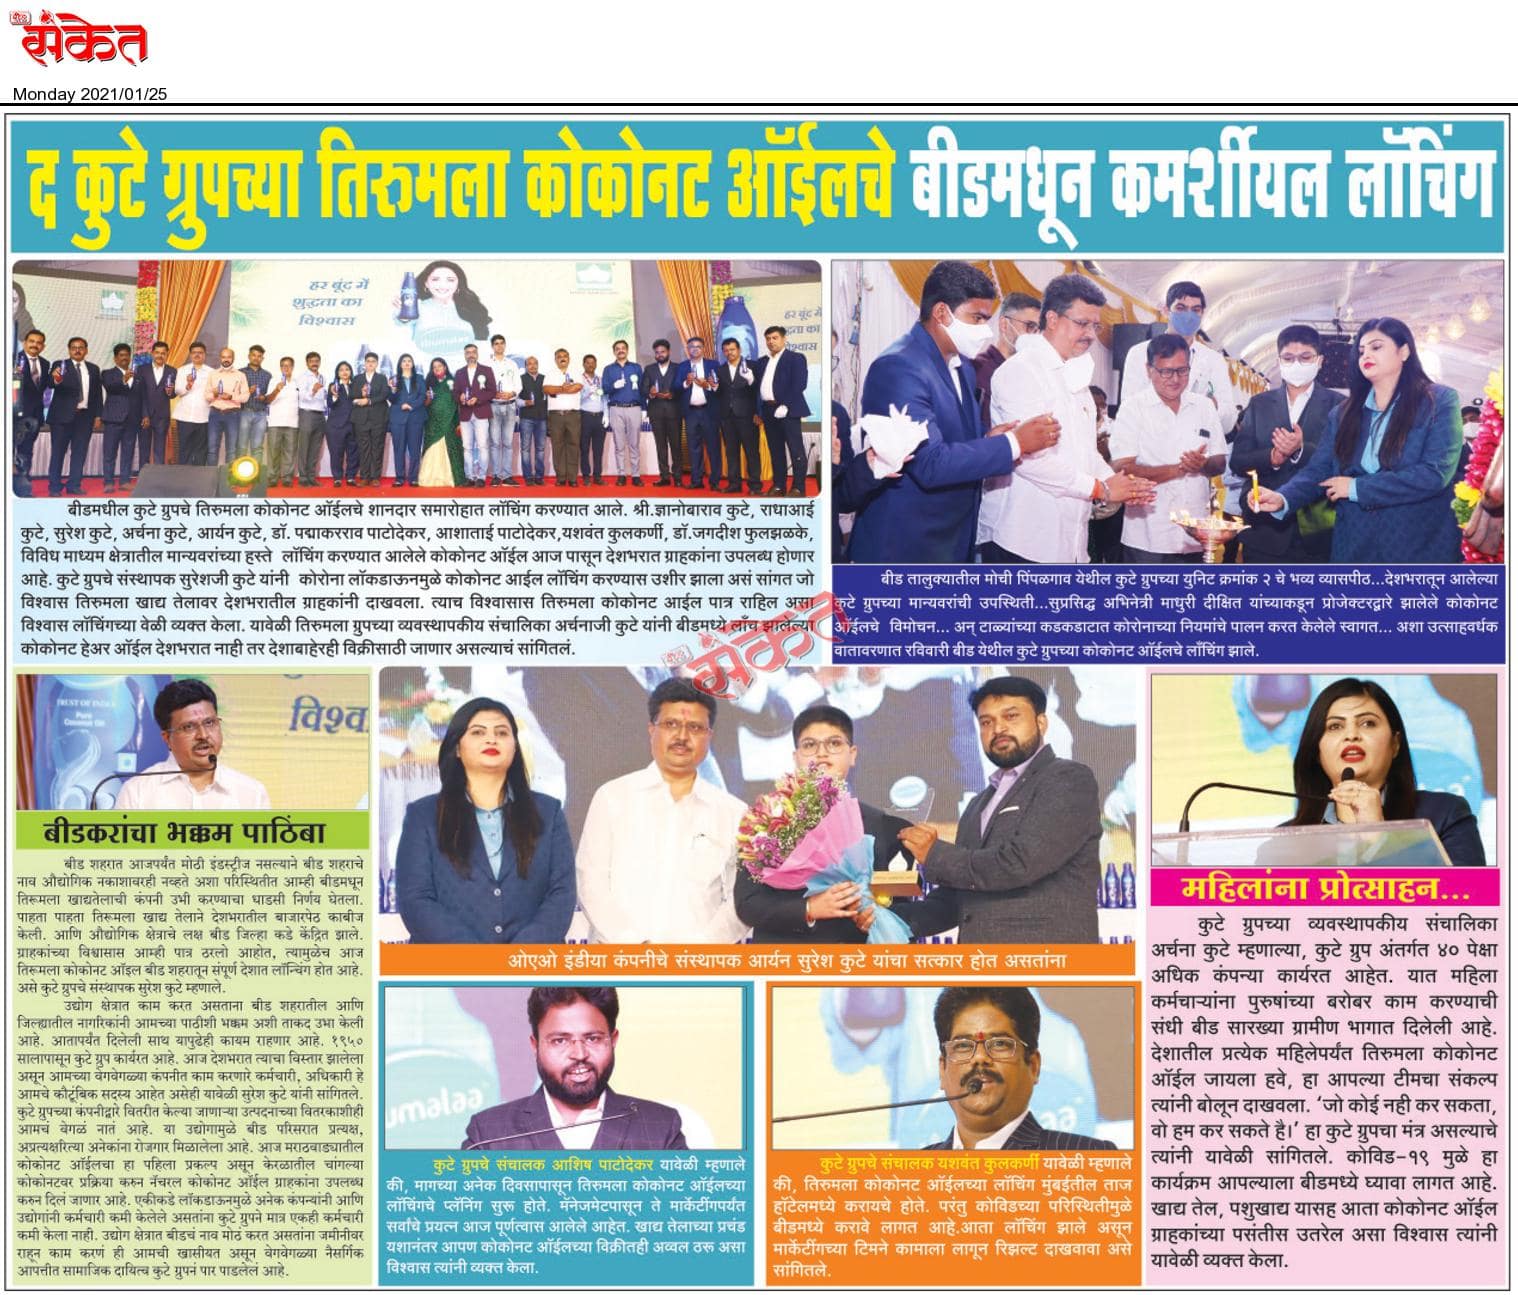 news published in daily sanket about product launching of Tirumalaa Coconut Oil By The Kute Group